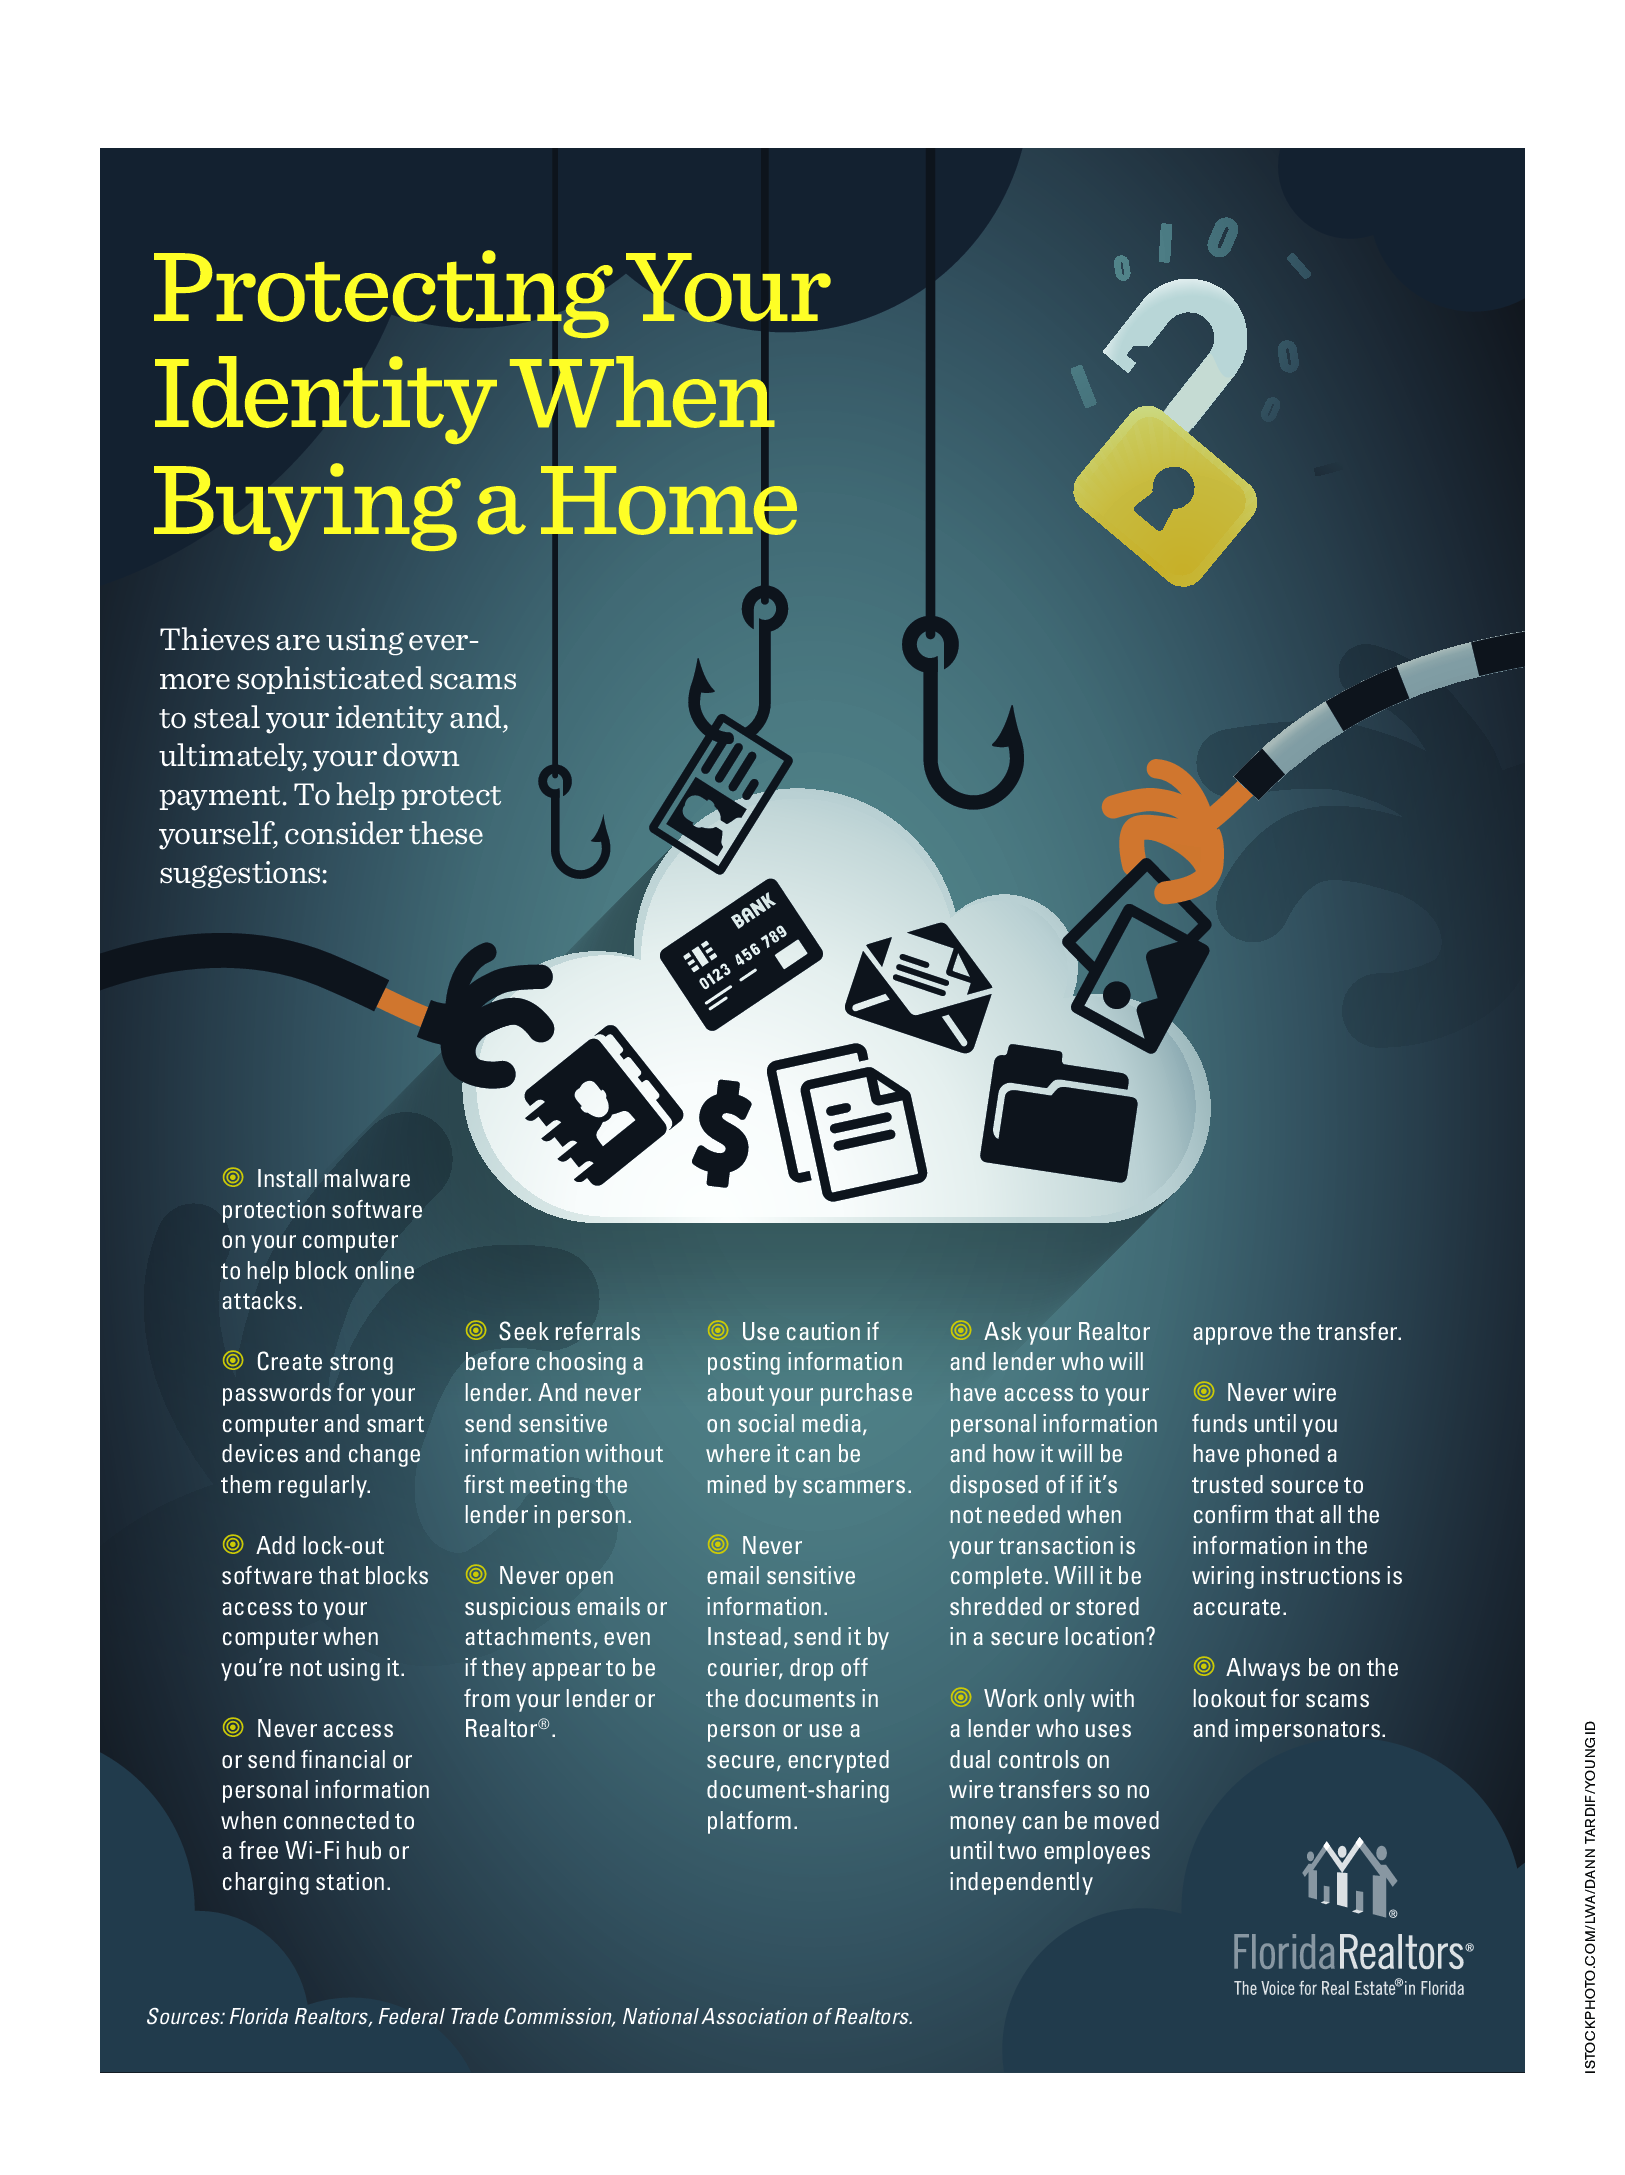 Protect Your Identity When Buying a Home